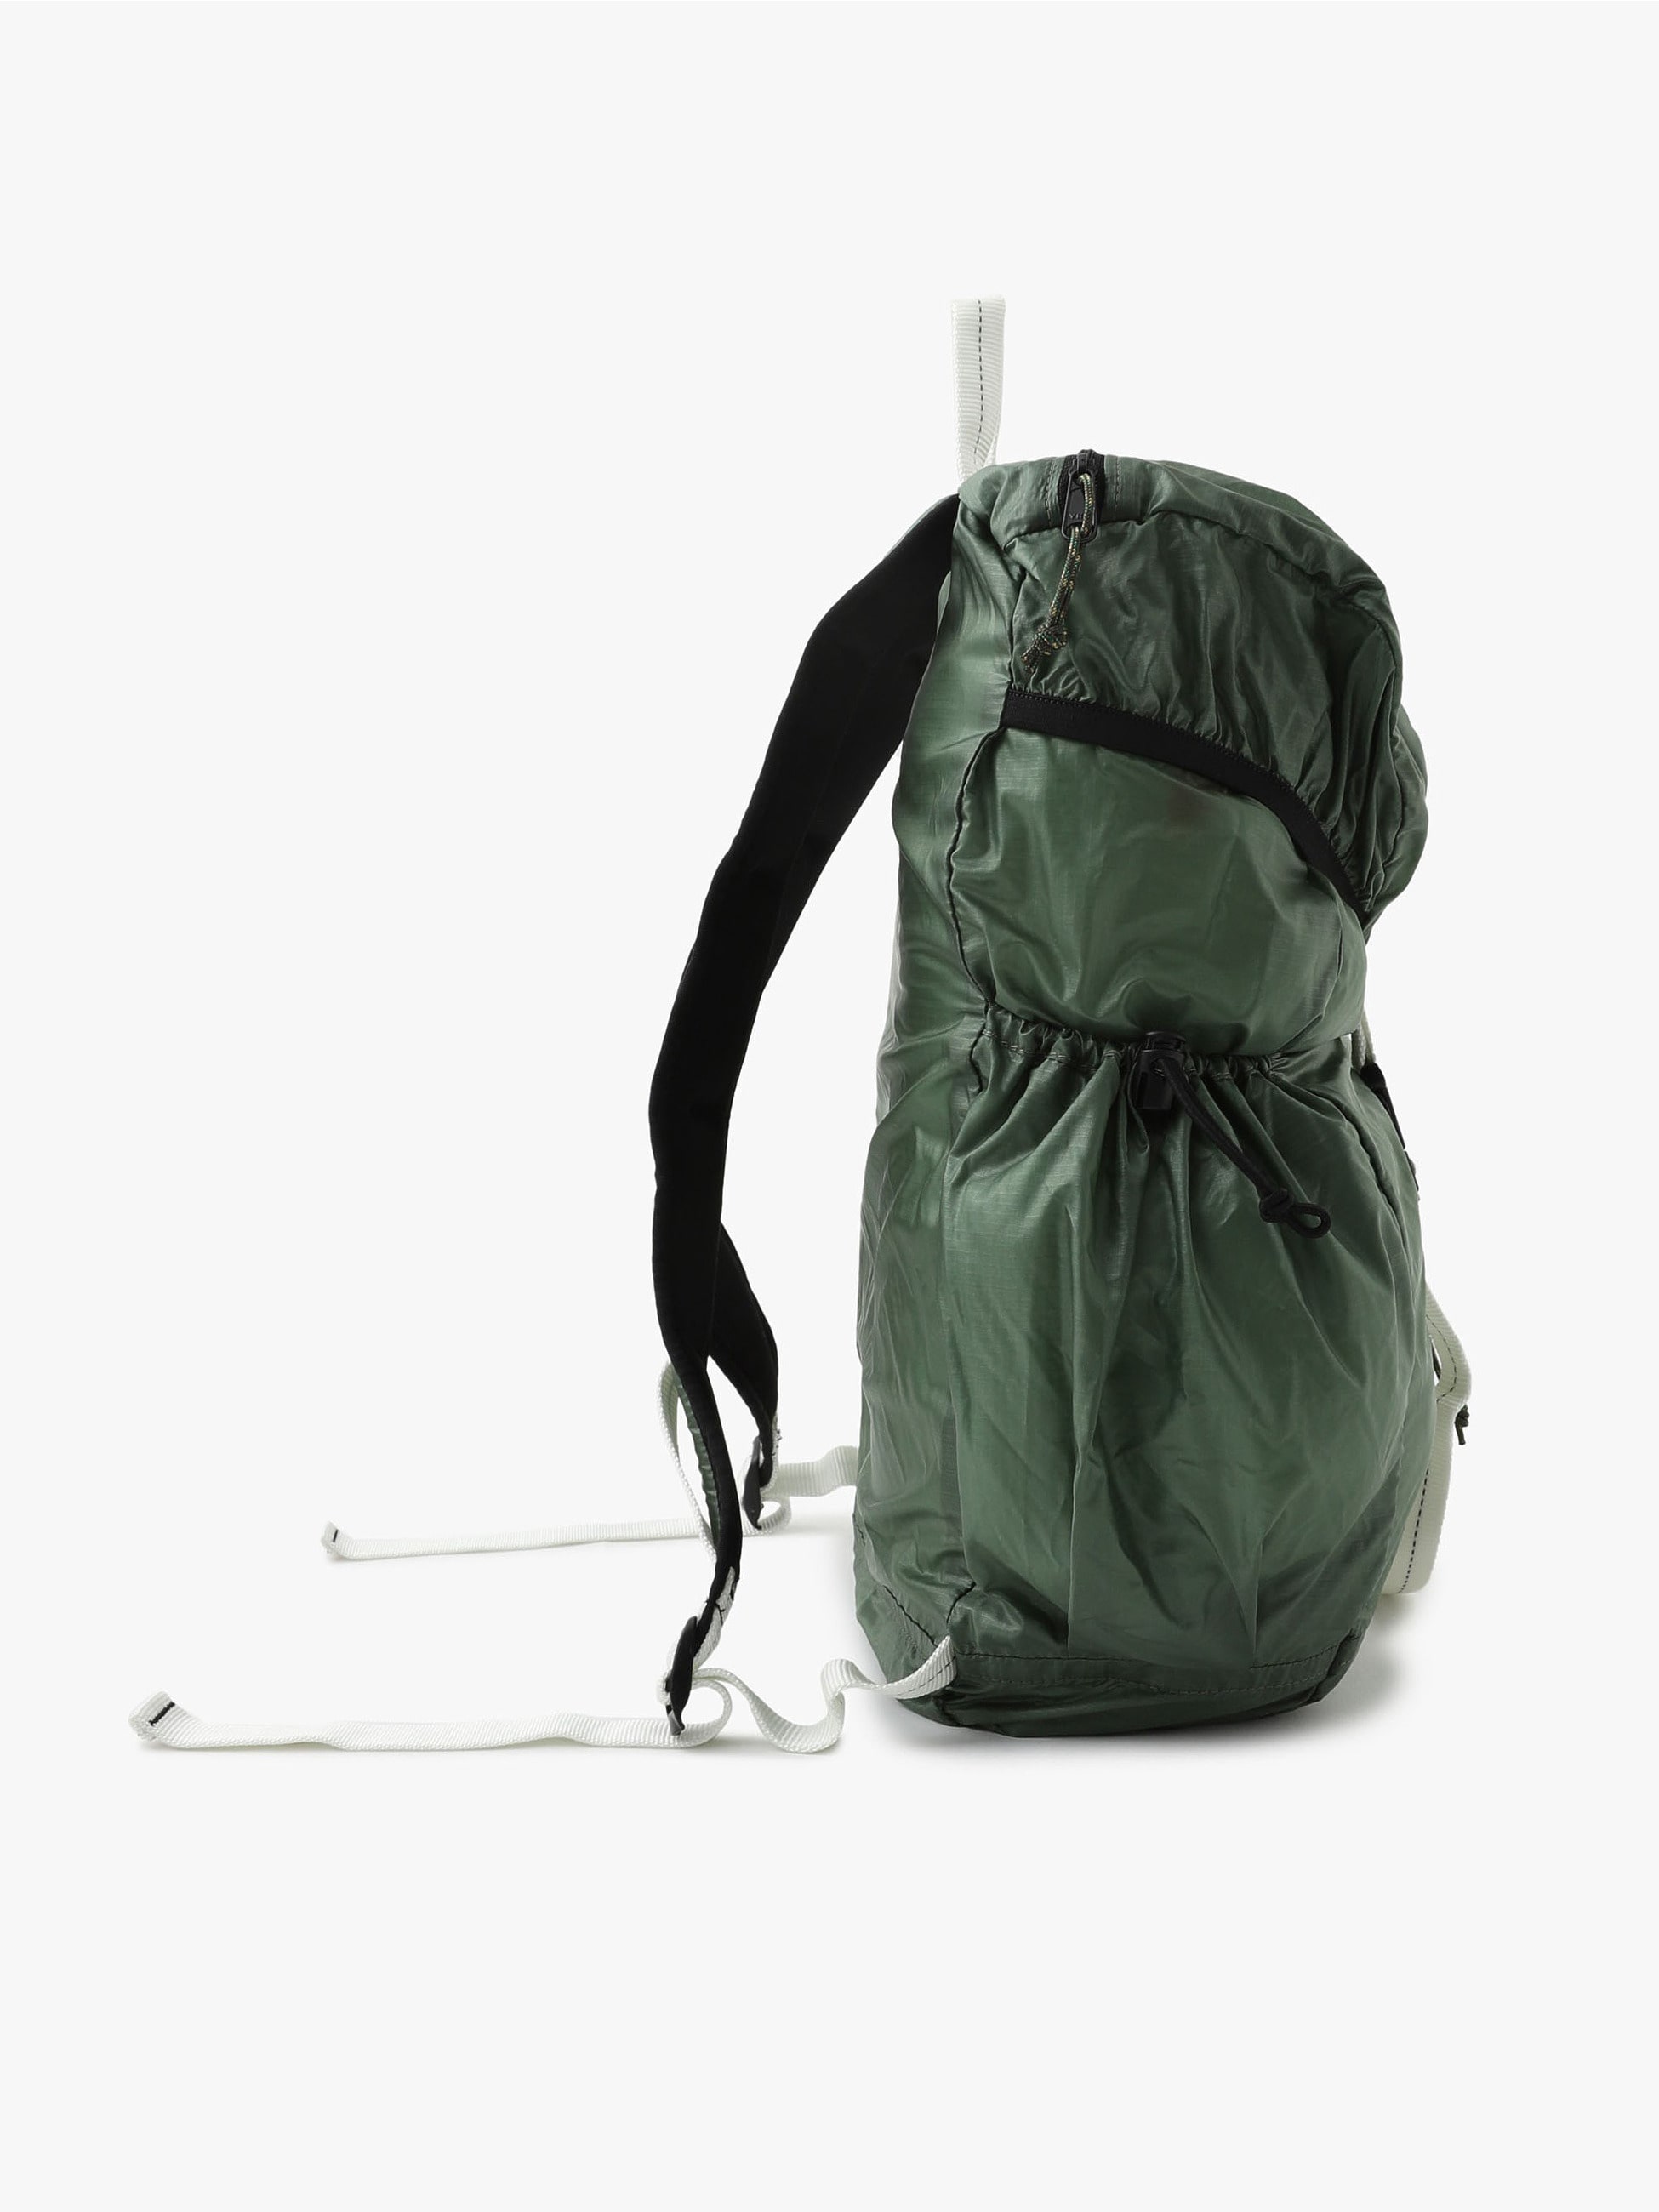 epperson mauntaineering パラシュート エコバッグ | ito-thermie.nl